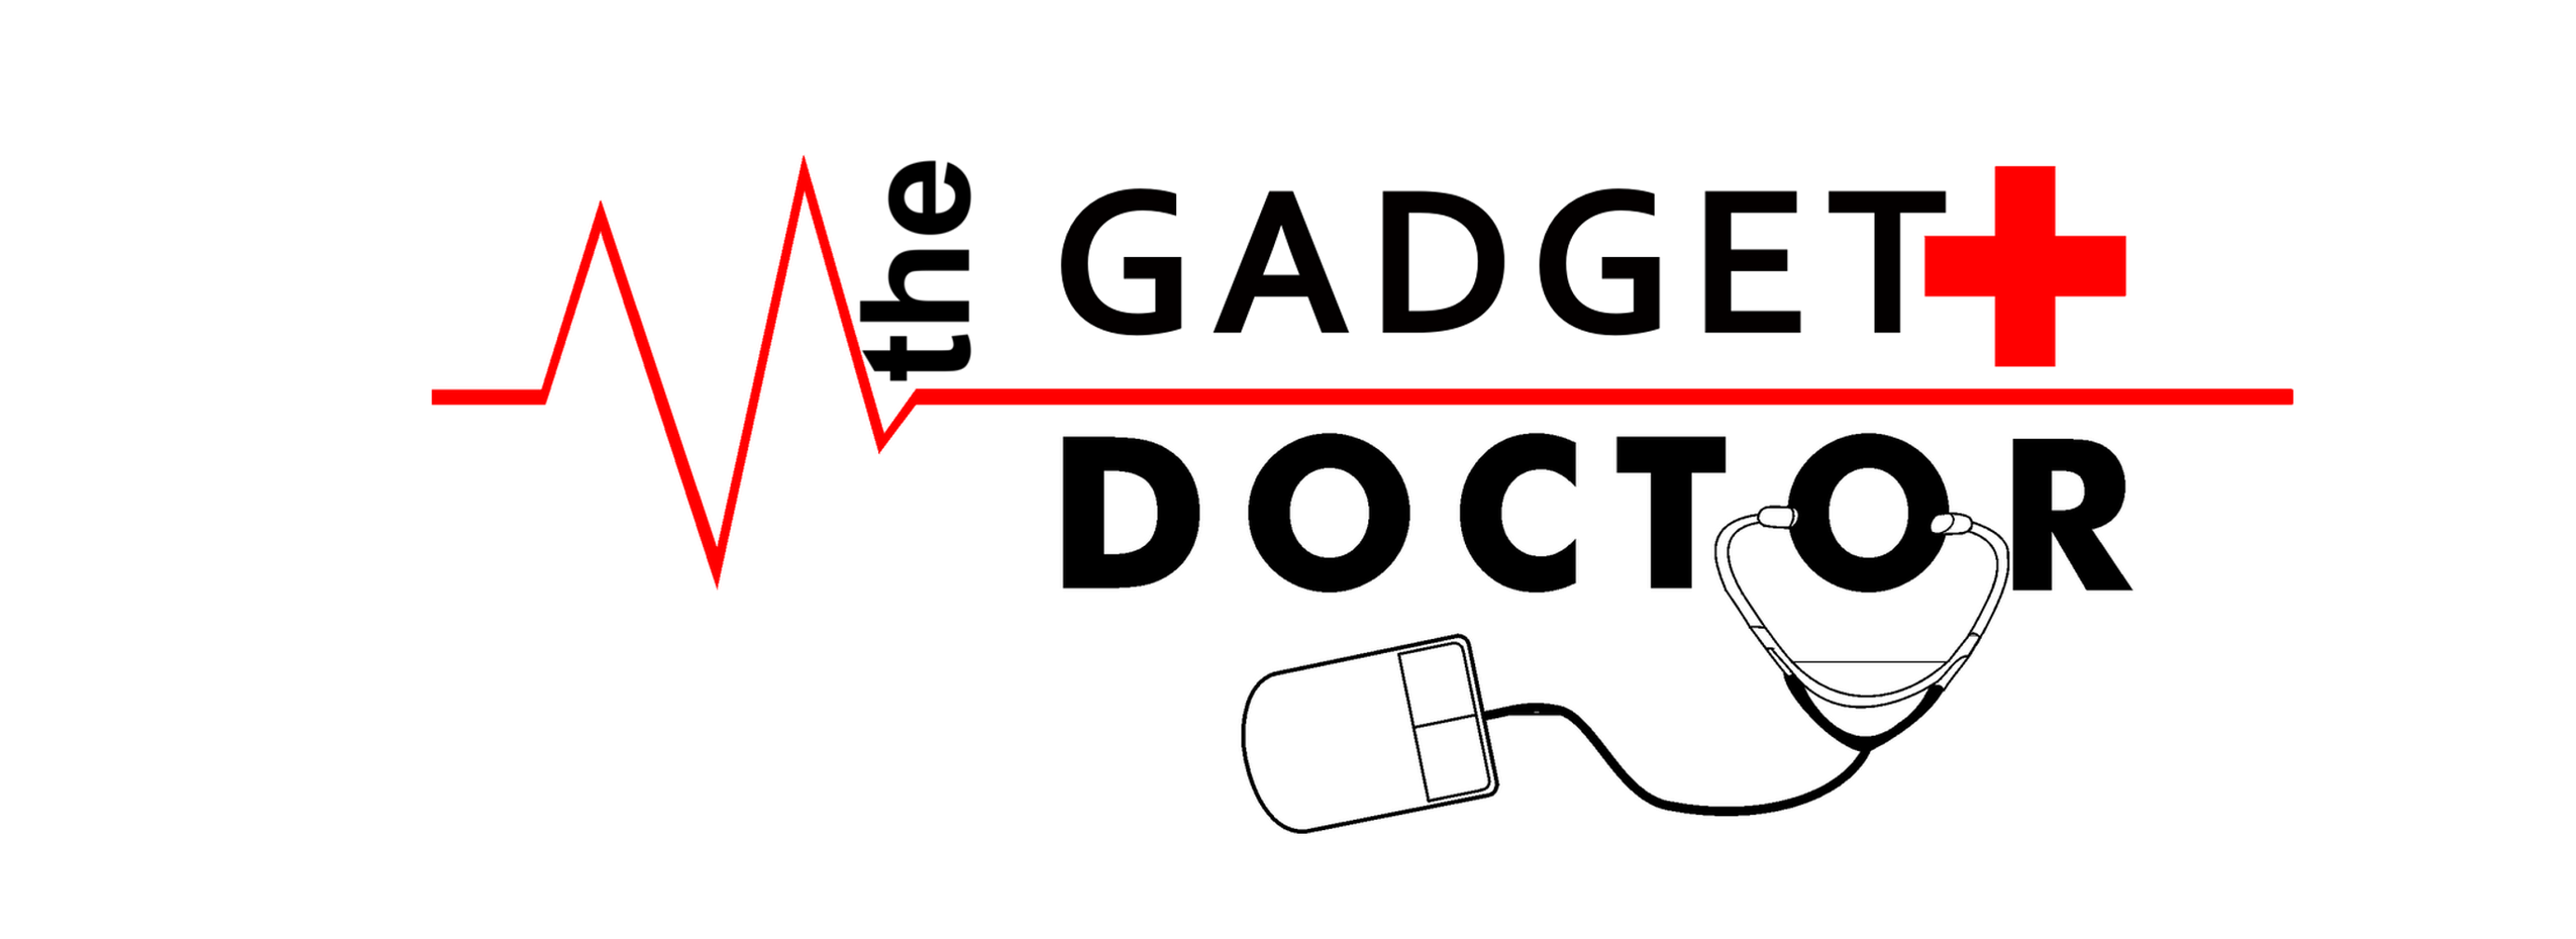 the_gadget_doctor_logo.png